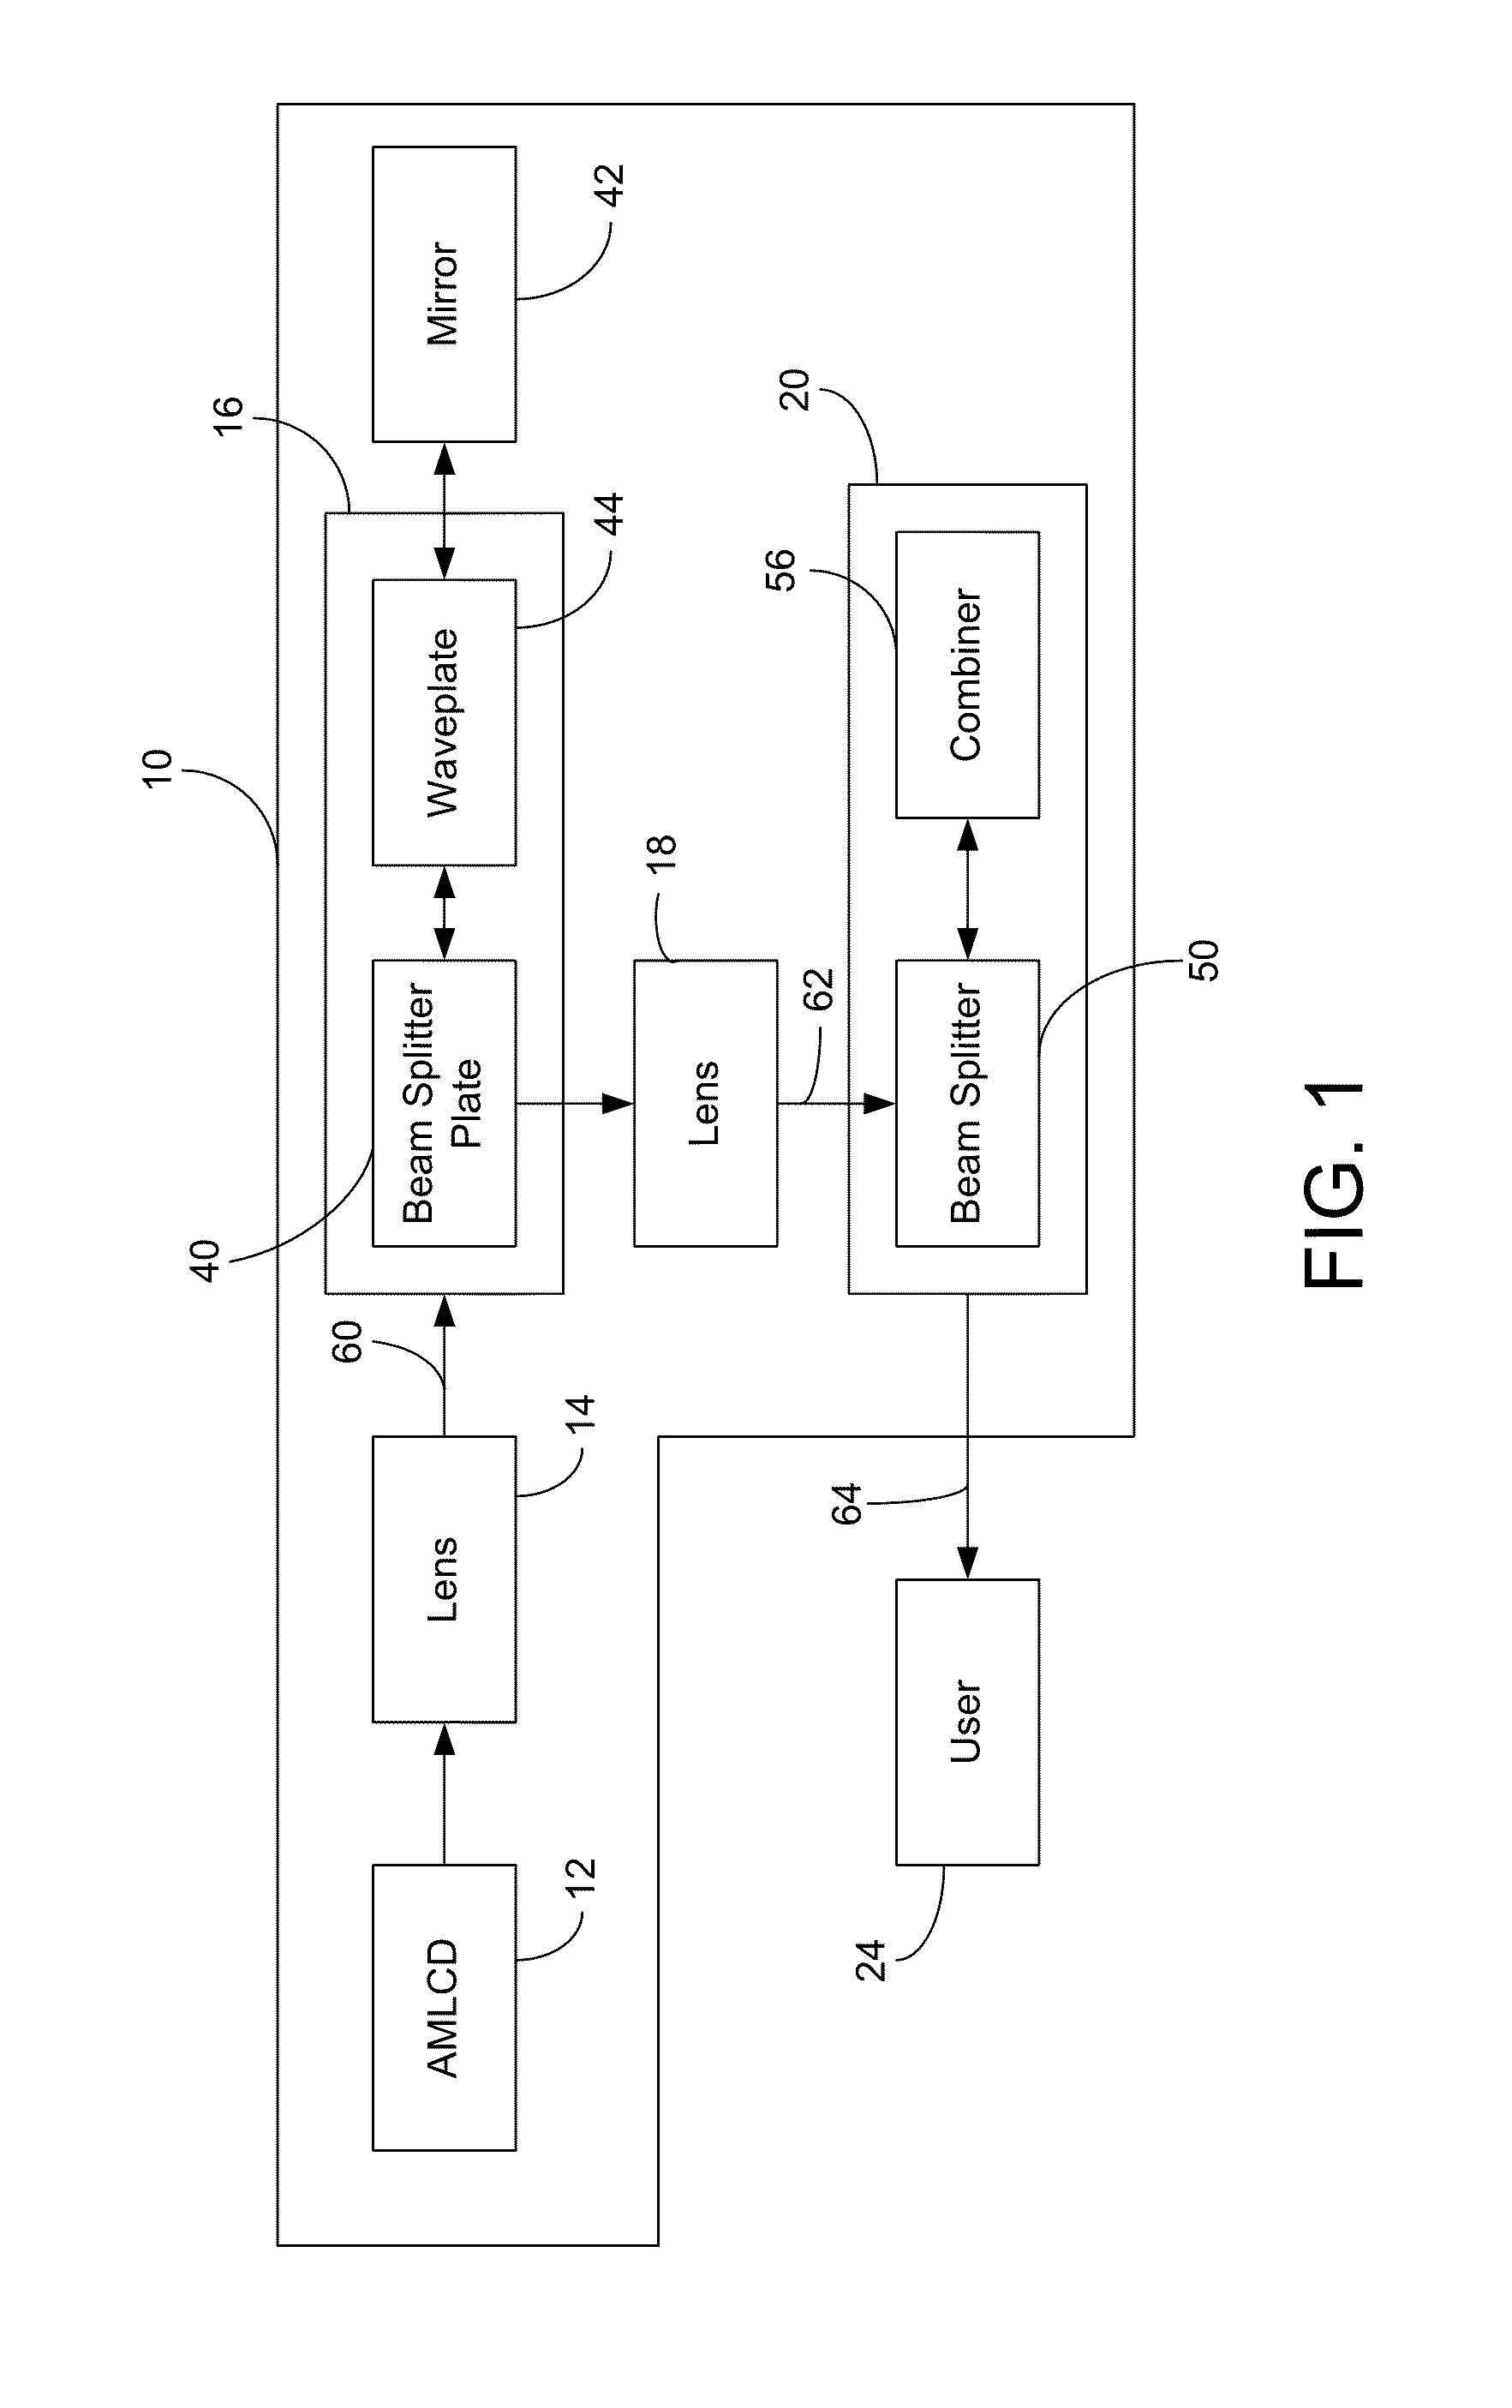 Method of and system for providing a head up display (HUD)